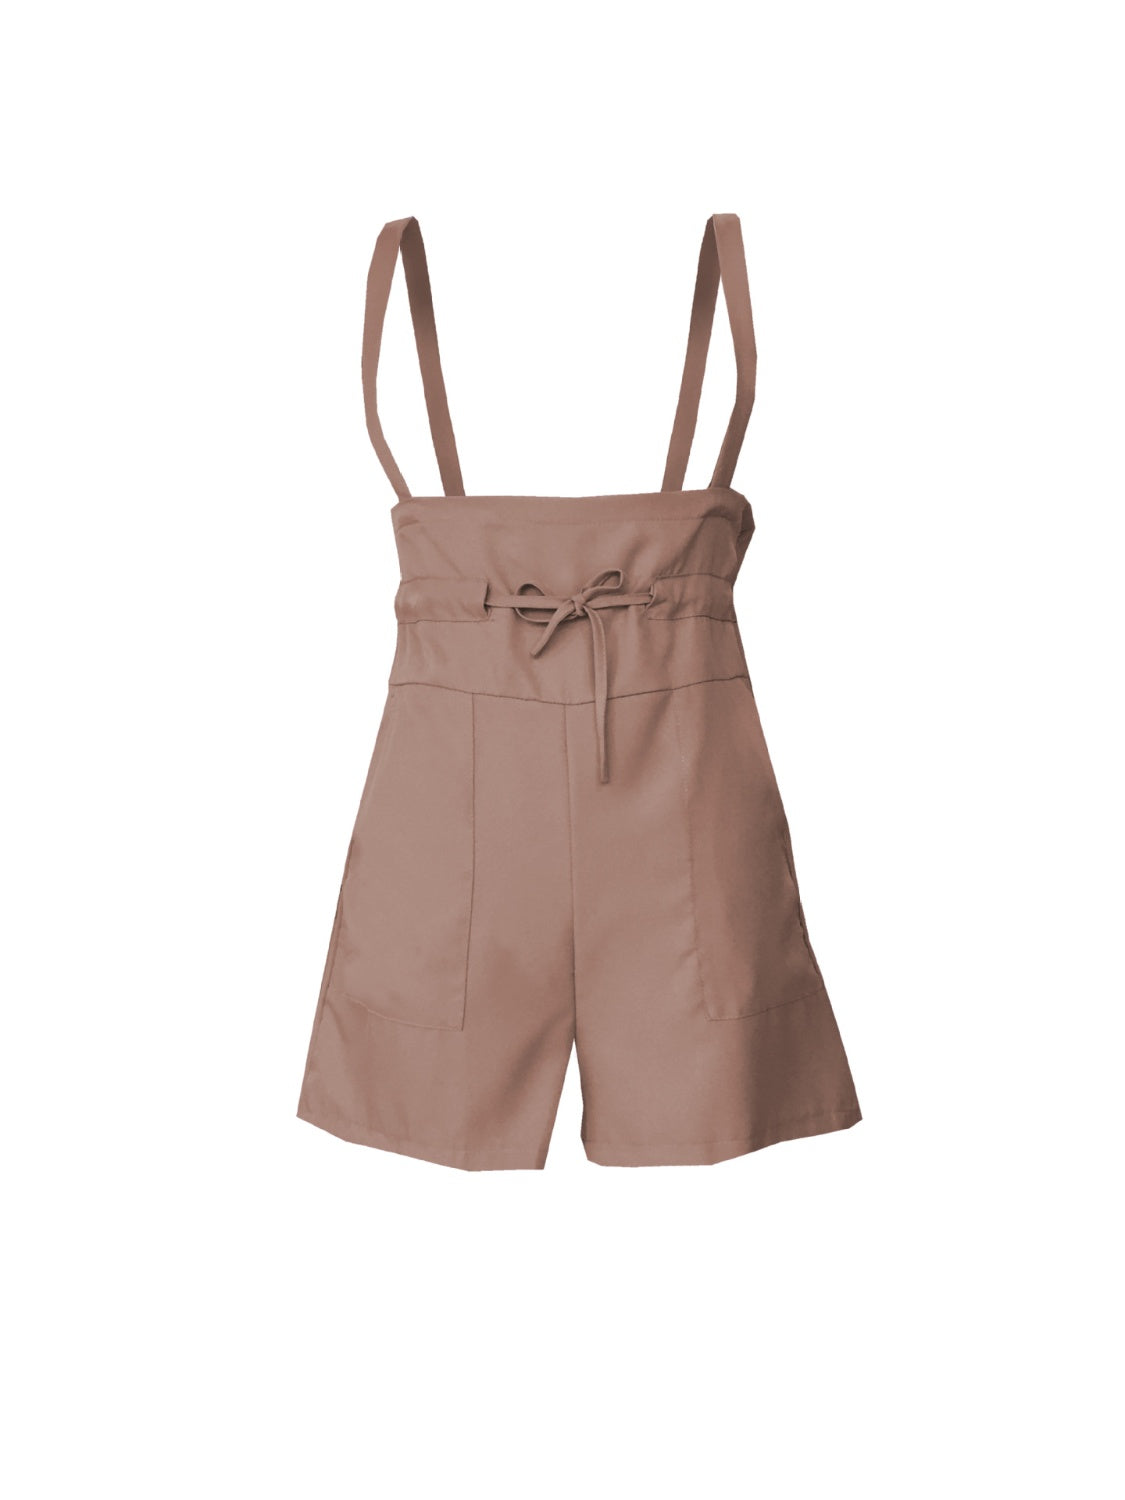 TEEK - Drawstring Pocketed Wide Strap Pocketed Short Overalls OVERALLS TEEK Trend   